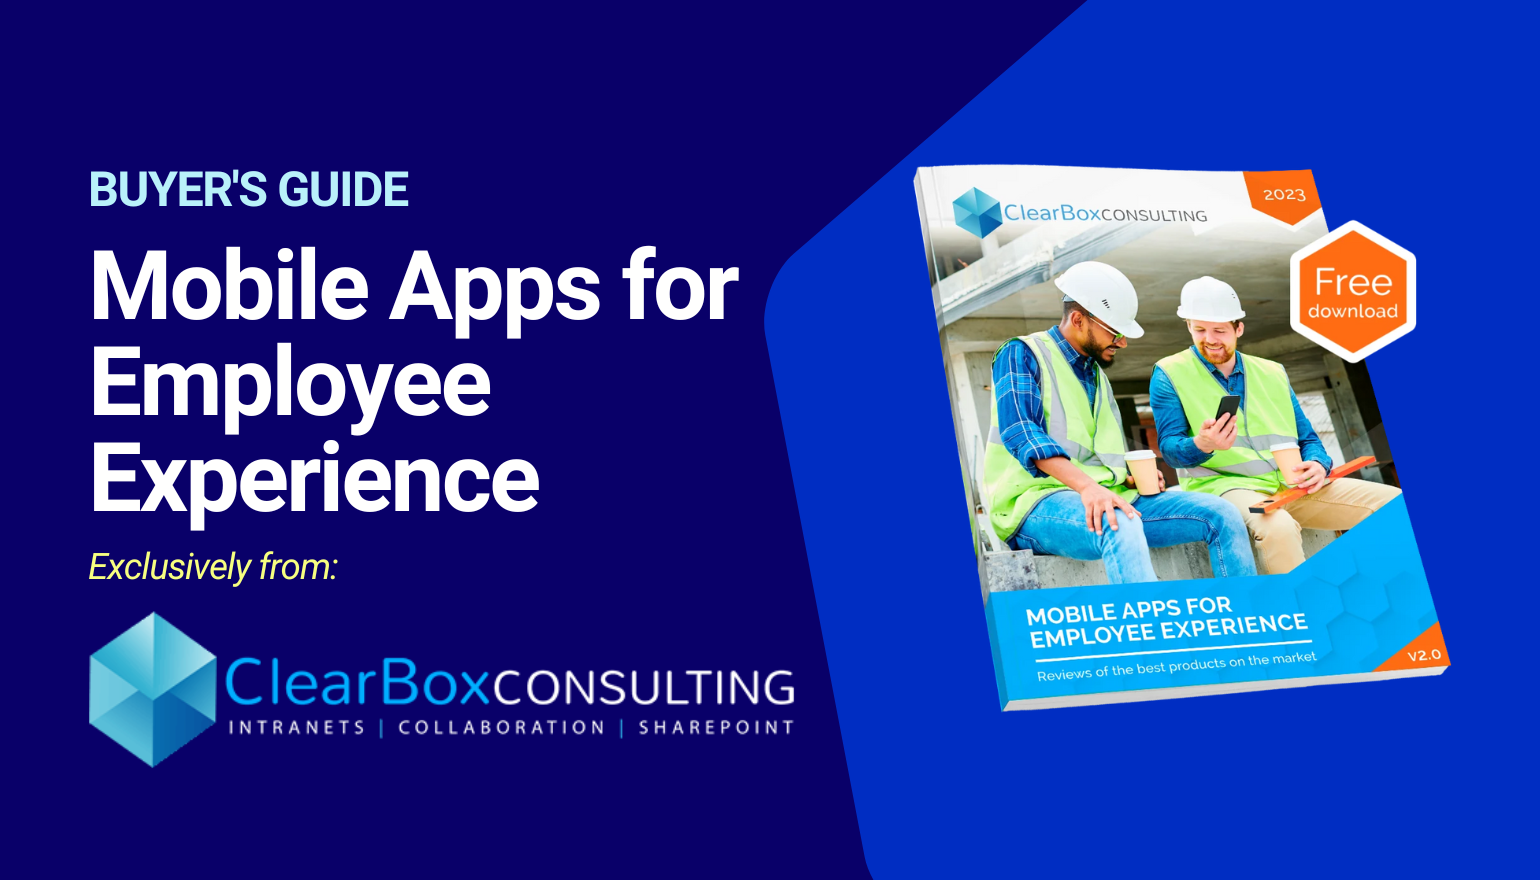 ClearBox Consulting Mobile Apps for Employee Experience Report